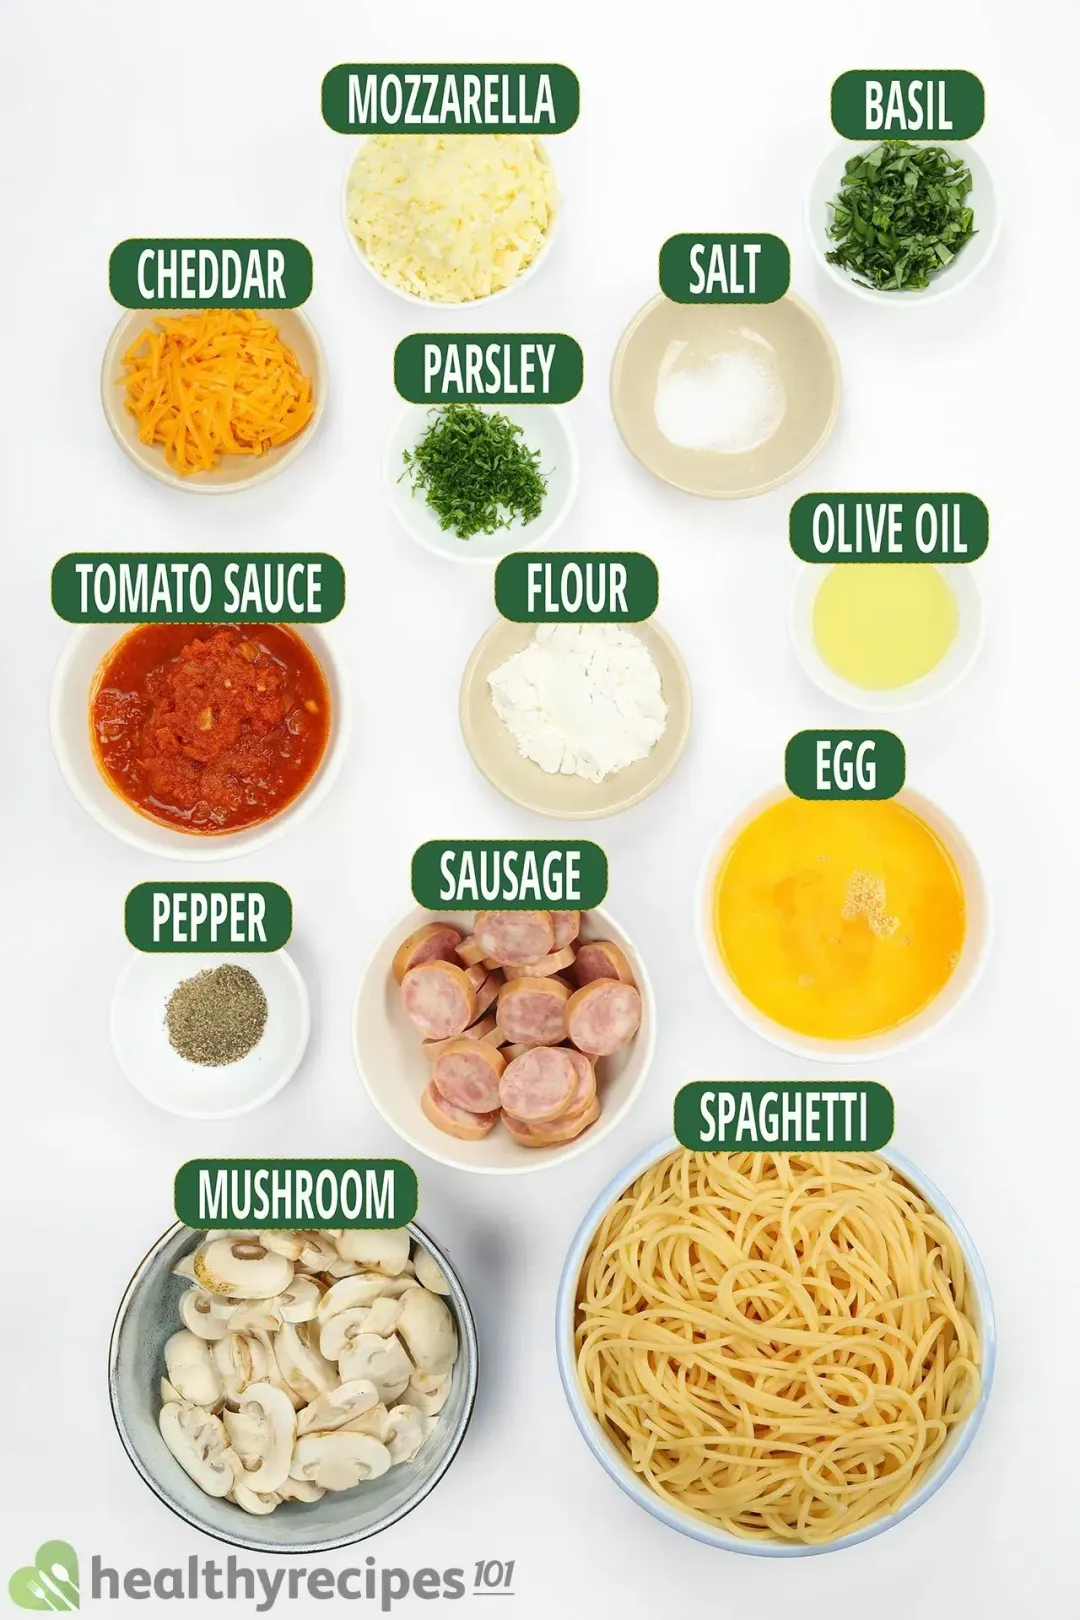 Ingredients for Spaghetti Pizza